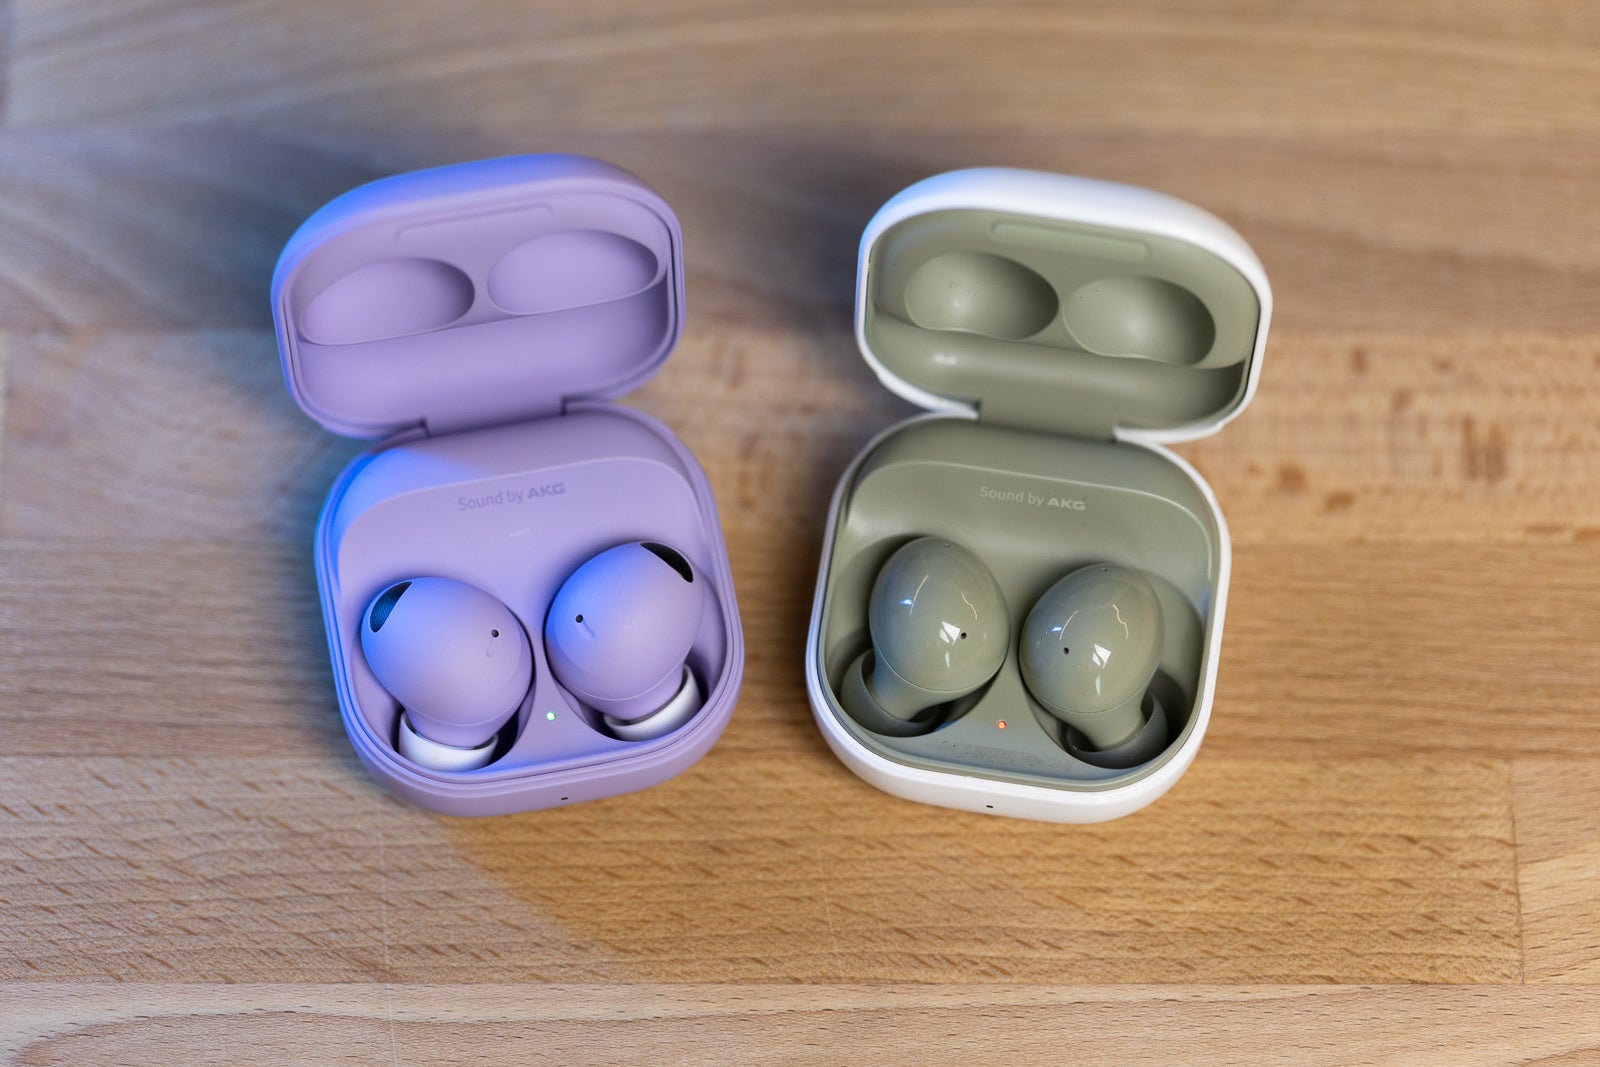 (Image credit - PhoneArena) Galaxy Buds 2 Pro (left) and Galaxy Buds 2 (right) - Galaxy Buds 2 Pro vs Galaxy Buds 2: Can you hear a difference? Or even see it?